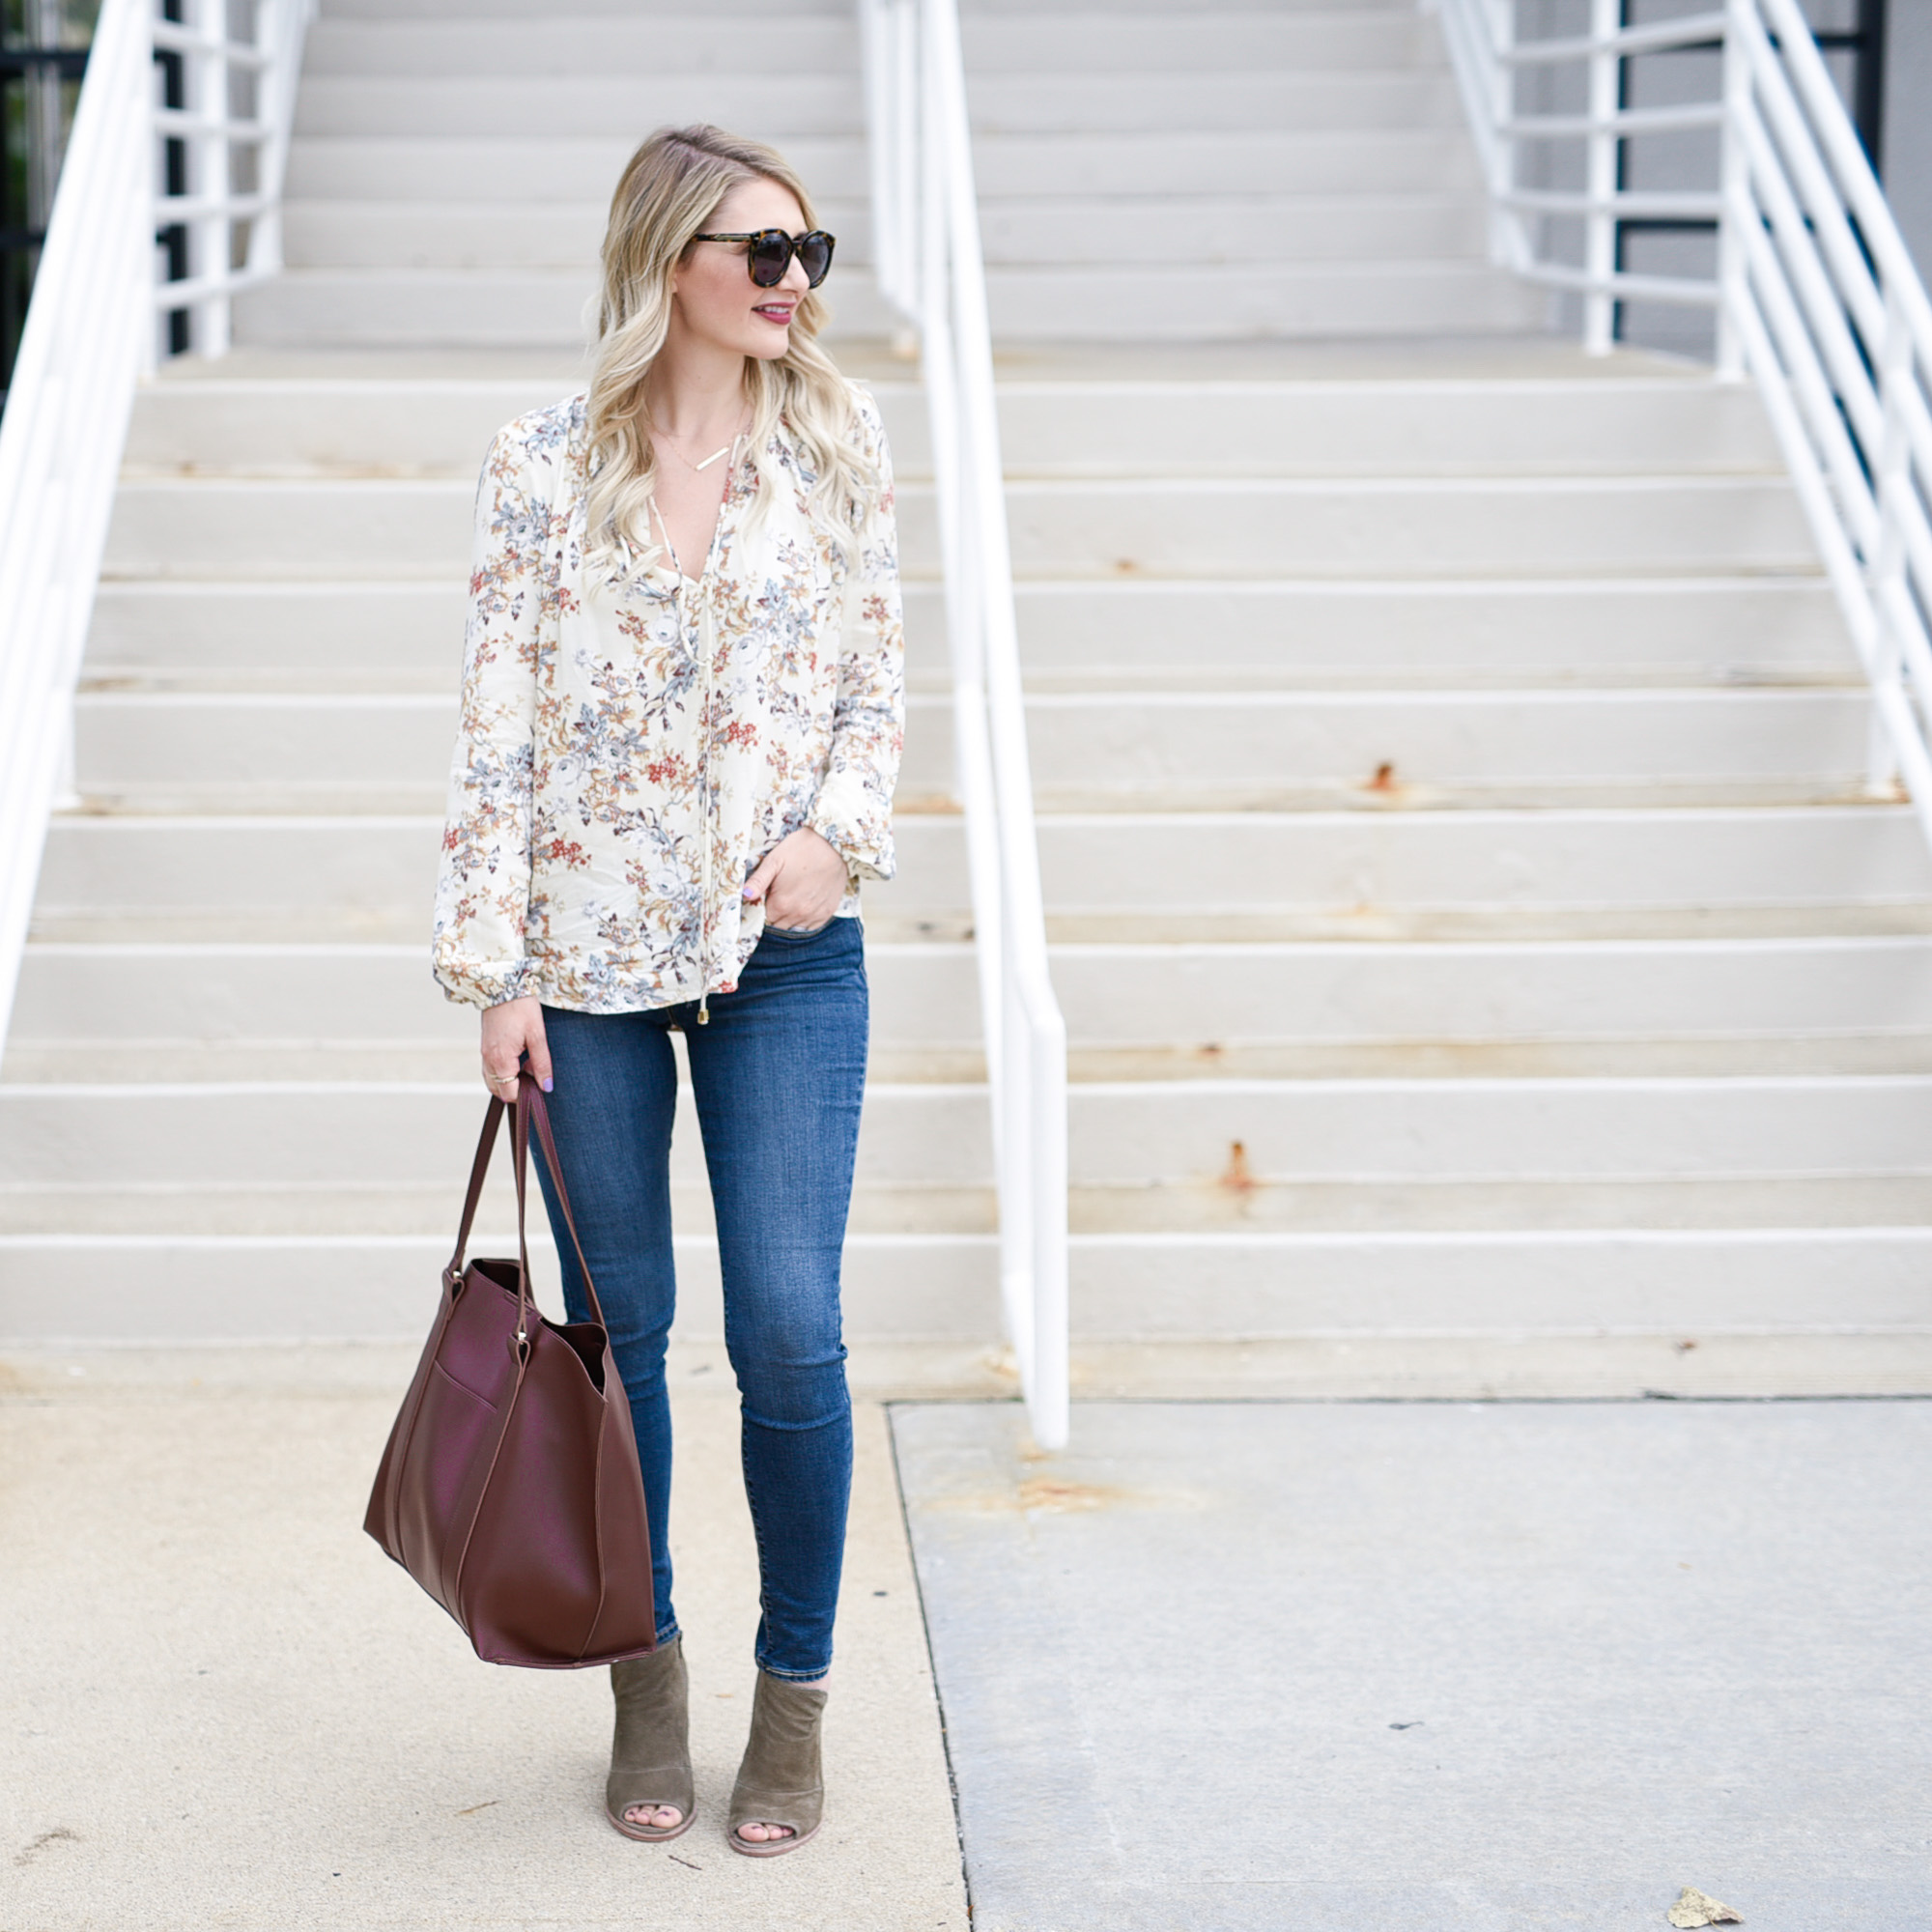 Jenna Colgrove wearing Levi's skinny jeans by Target. 